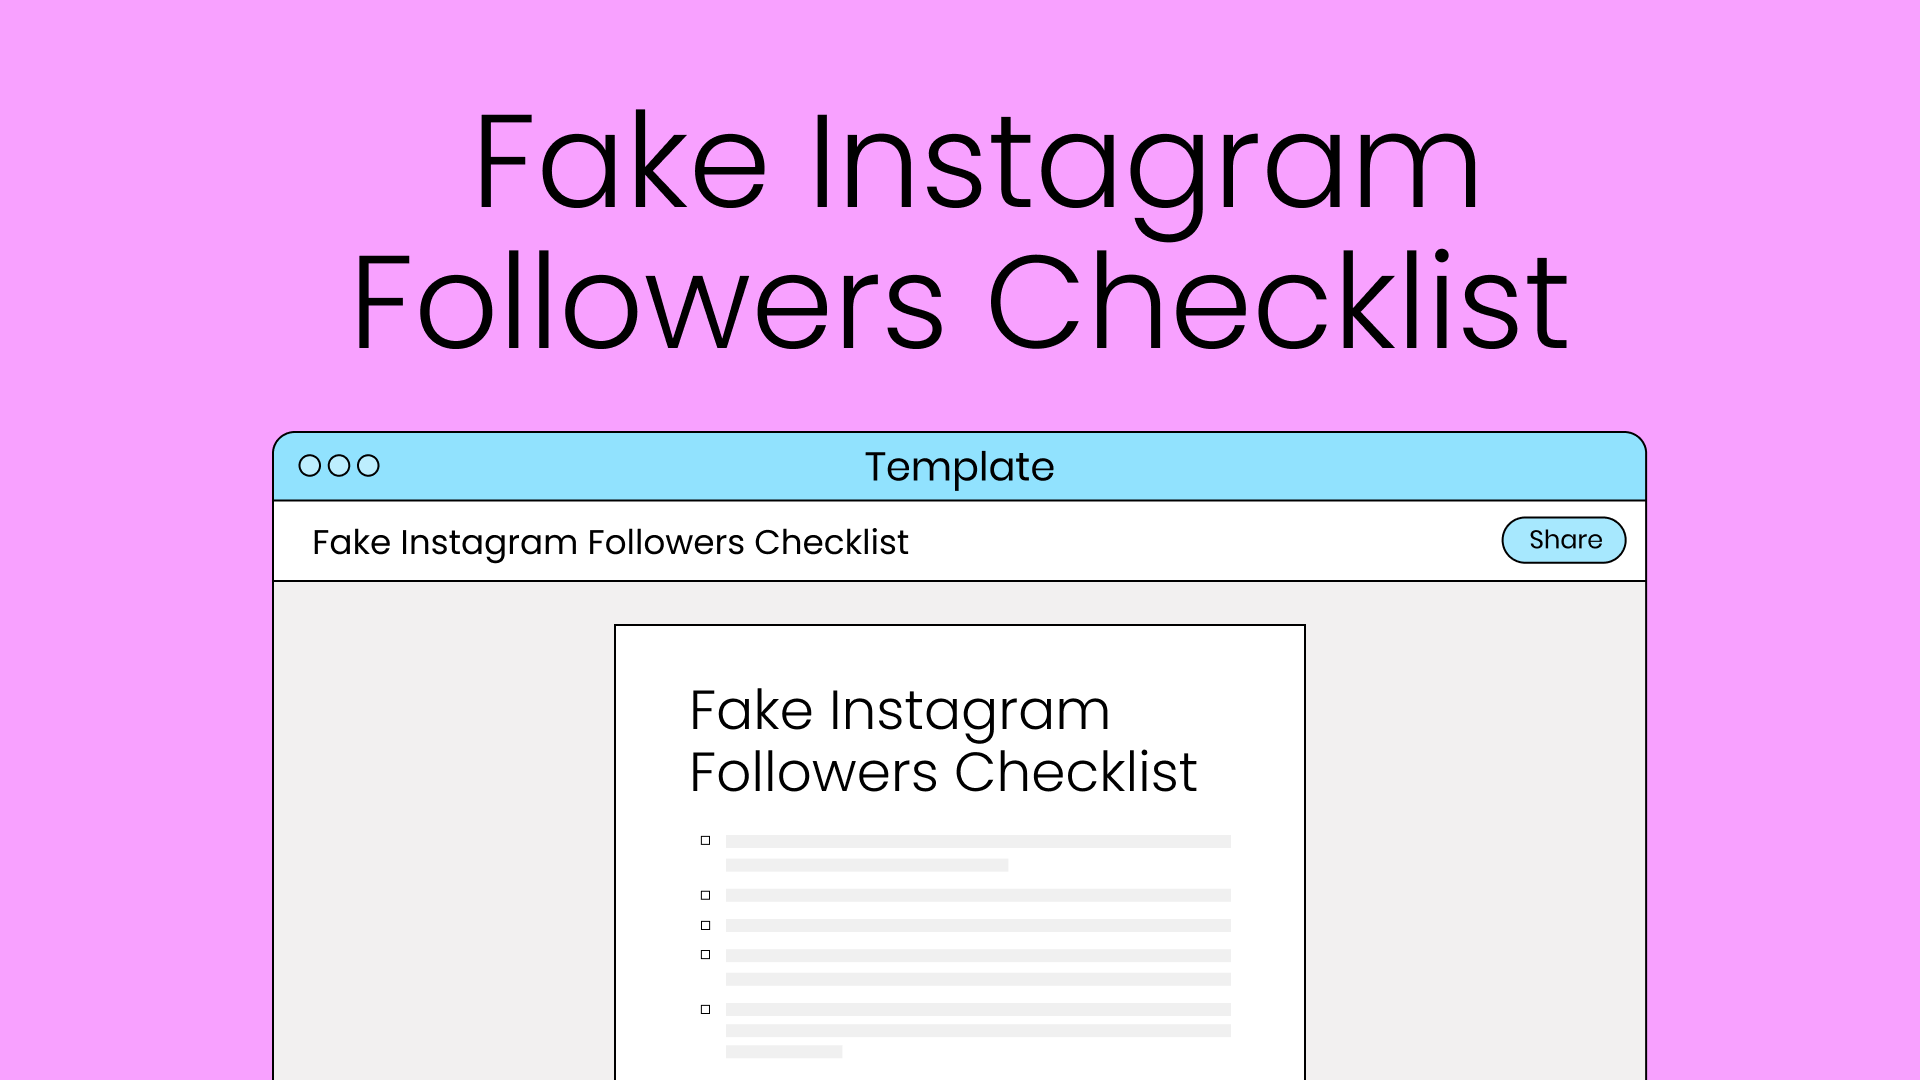 Decorative thumbnail for Later’s fake Instagram followers checklist.